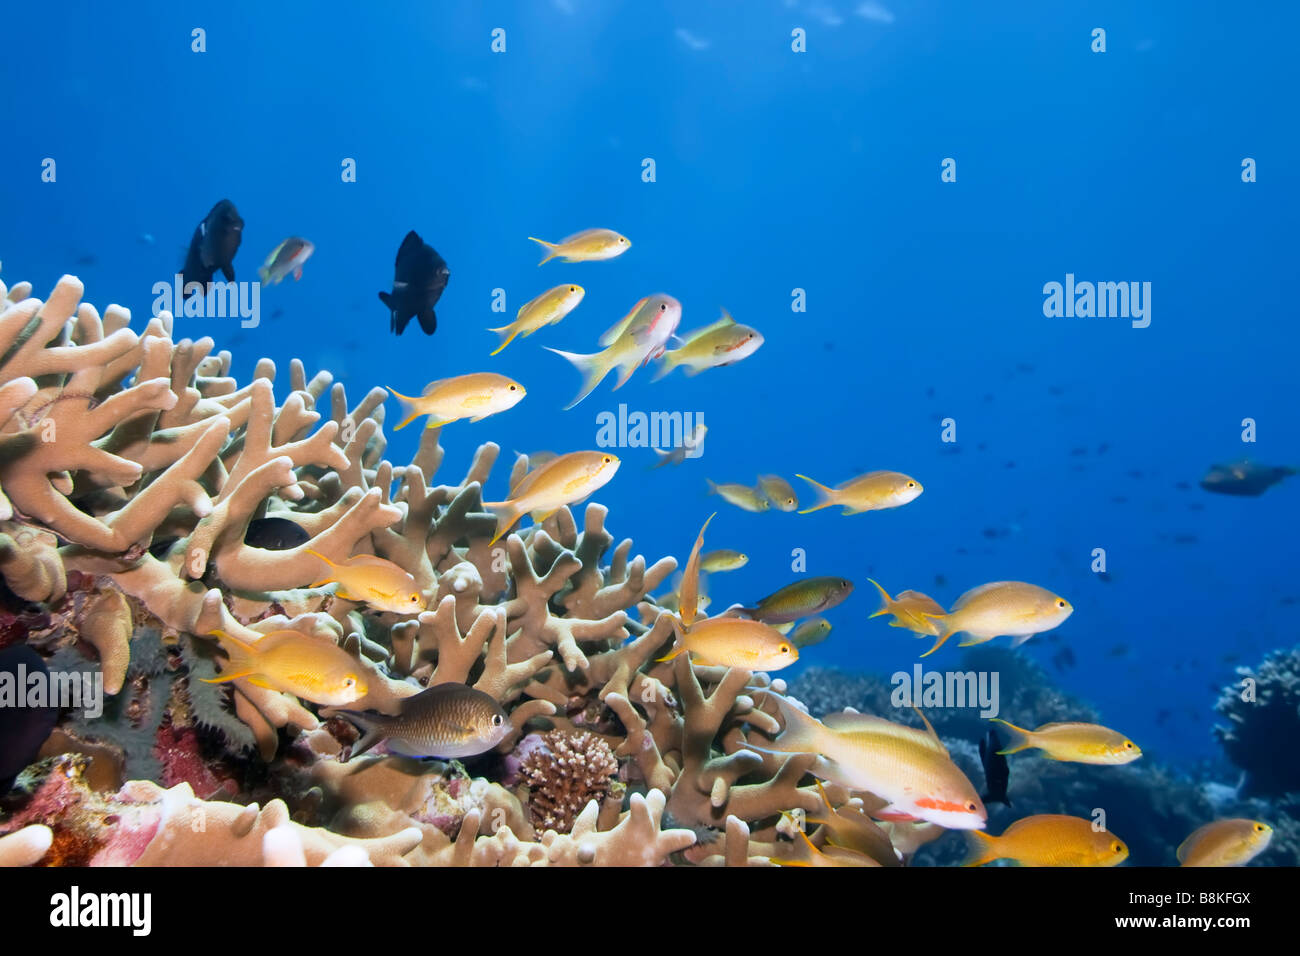 Underwater landscape with small fishes and coral Borneo Stock Photo